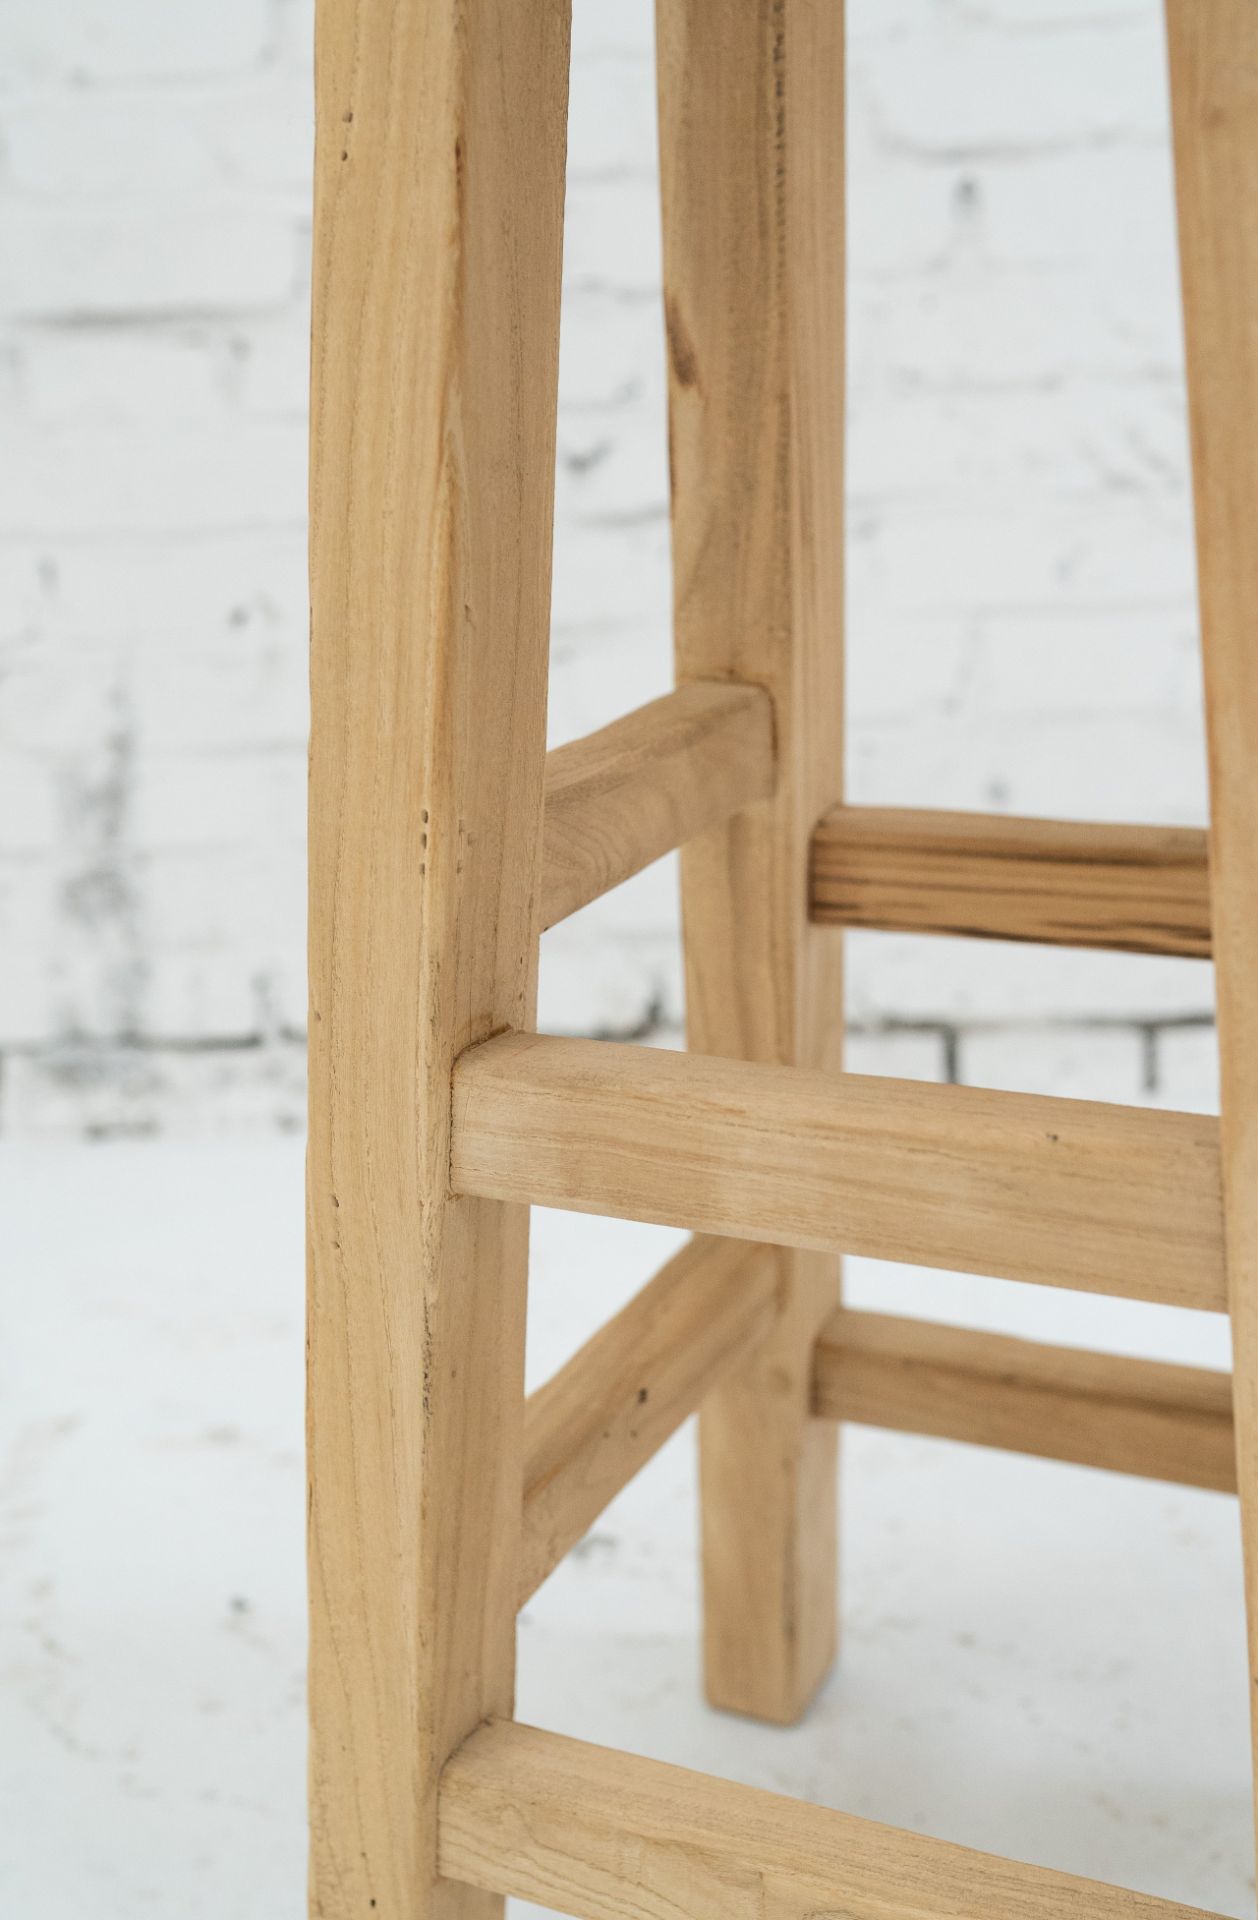 2 x Tall Elm Stool: Stunning wooden bar stools from the Heibei province of China. - Image 4 of 4